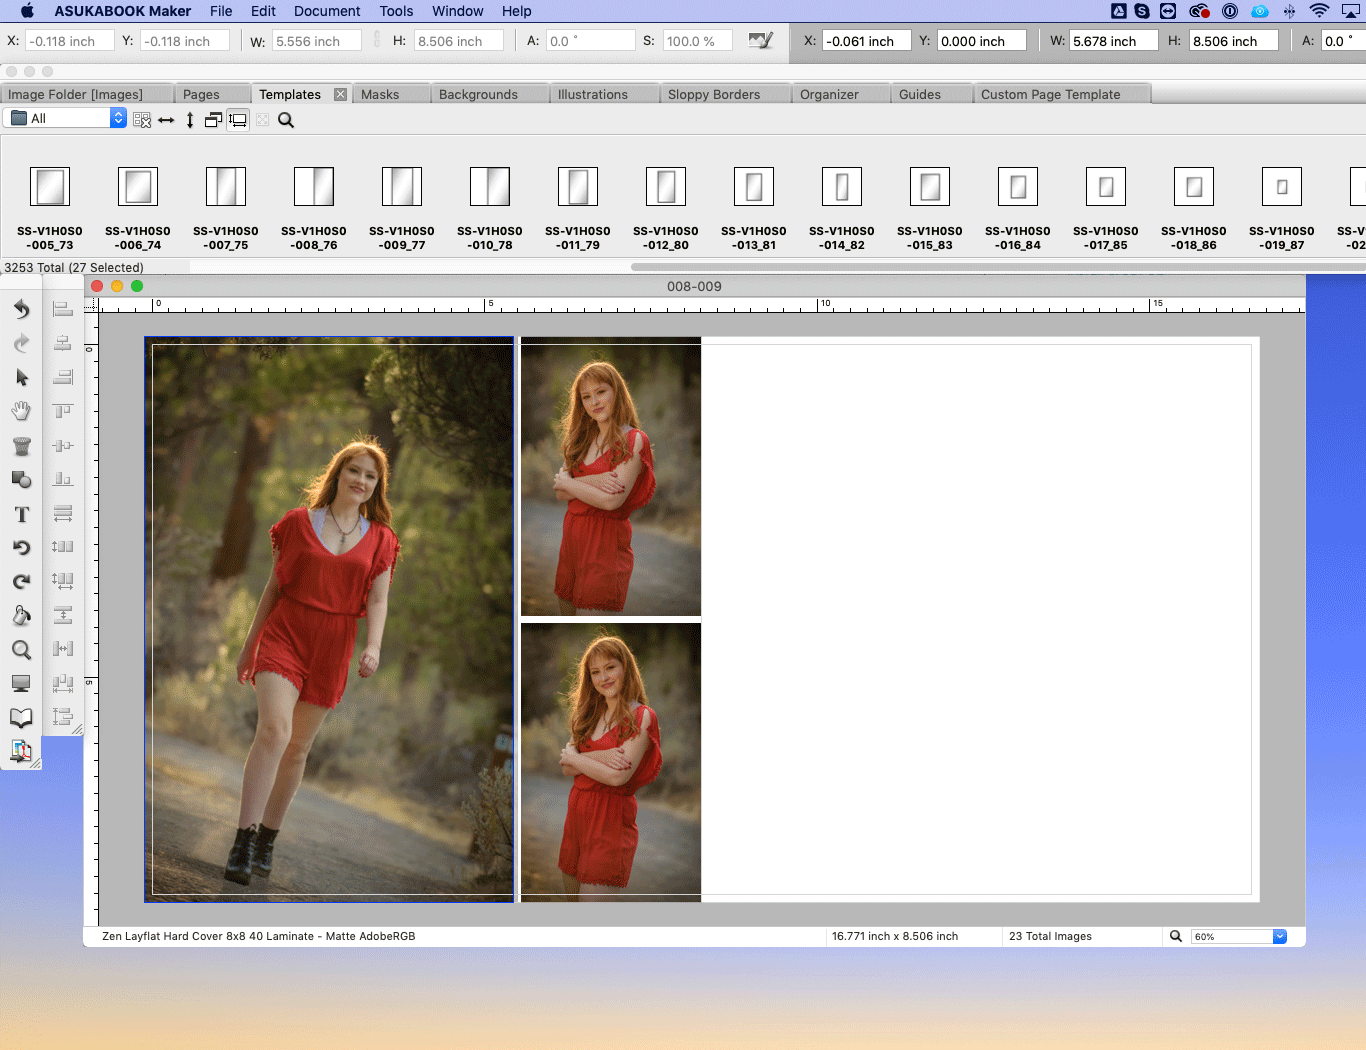 Swap Images within Layout